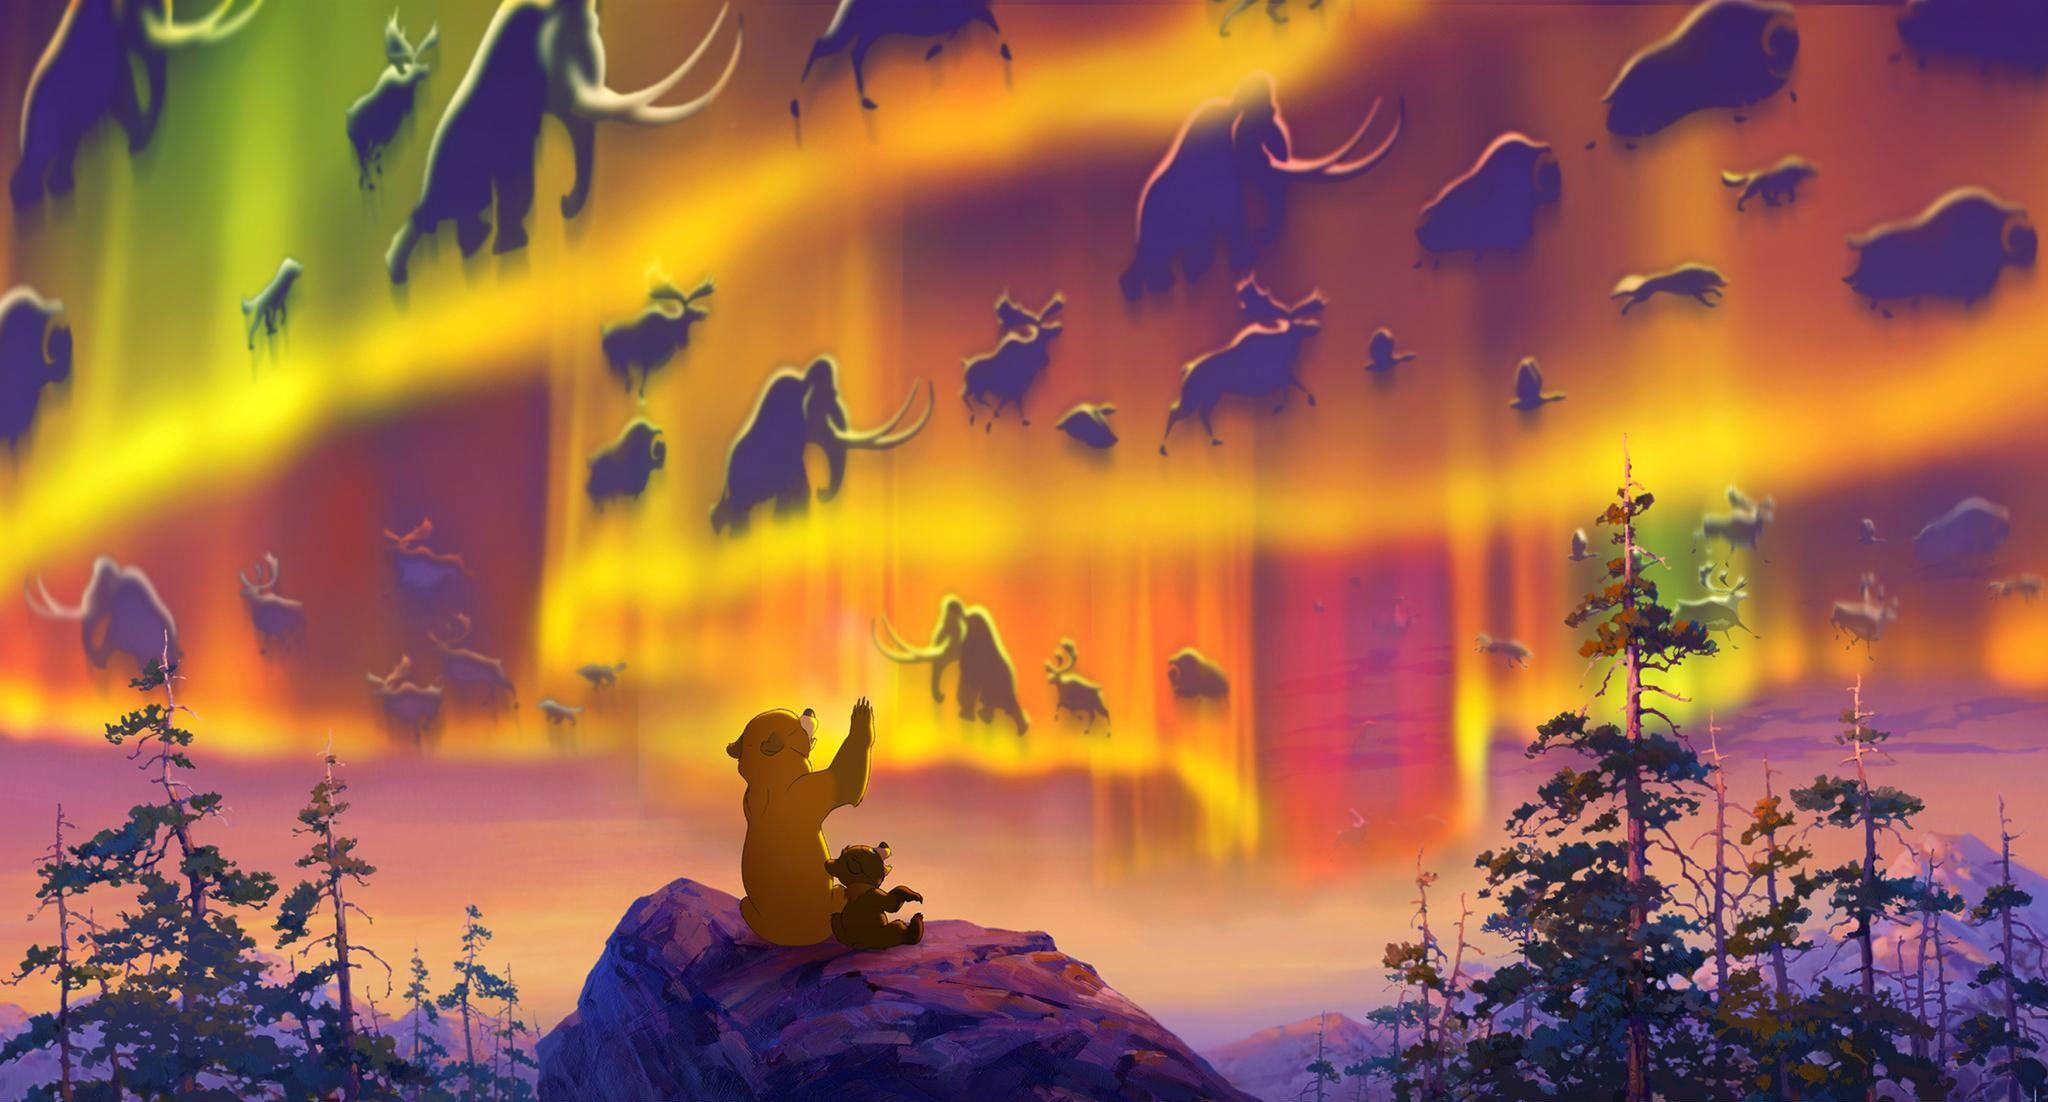 BROTHER BEAR disney family animation adventure comedy 1brotherbear wallpaper   2048x1206  583246  WallpaperUP